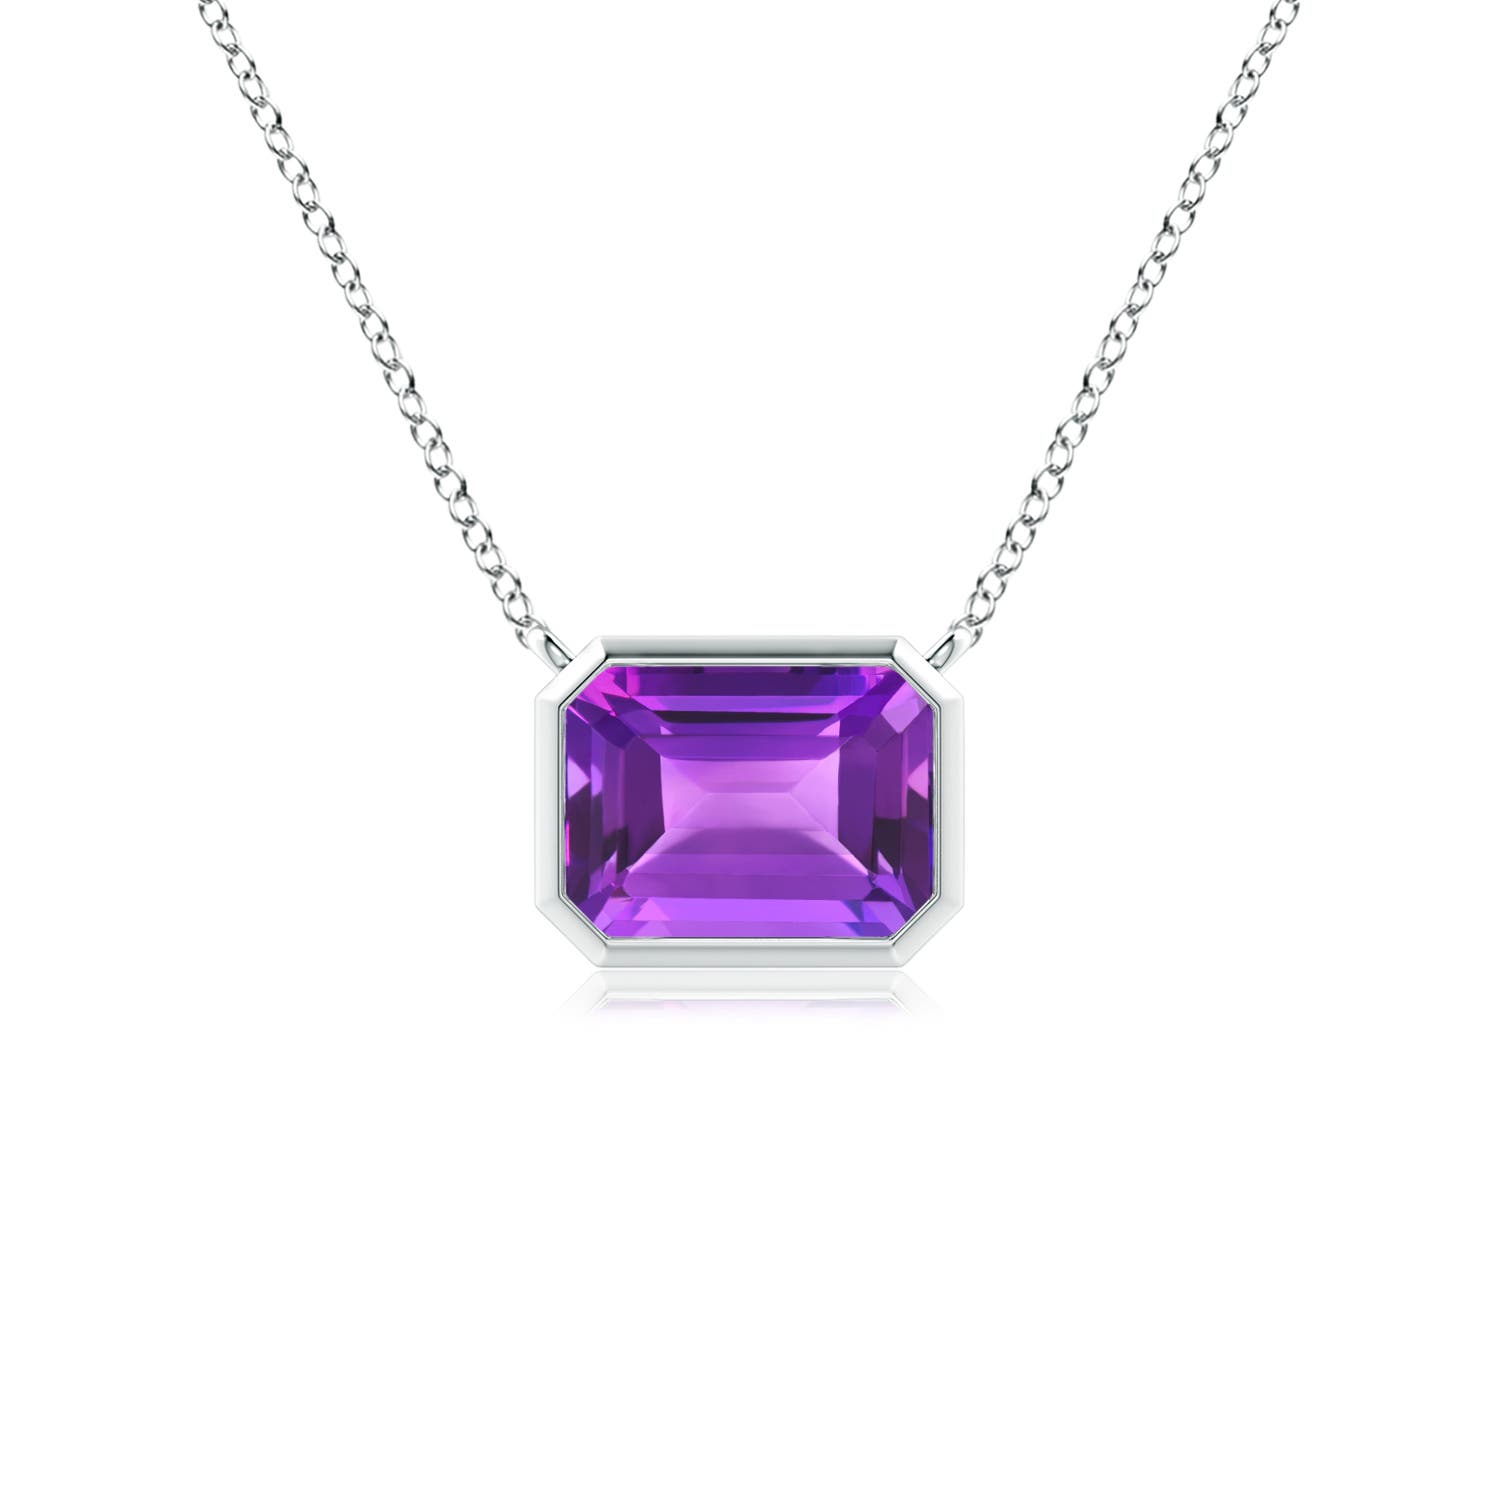 AAA - Amethyst / 0.9 CT / 14 KT White Gold